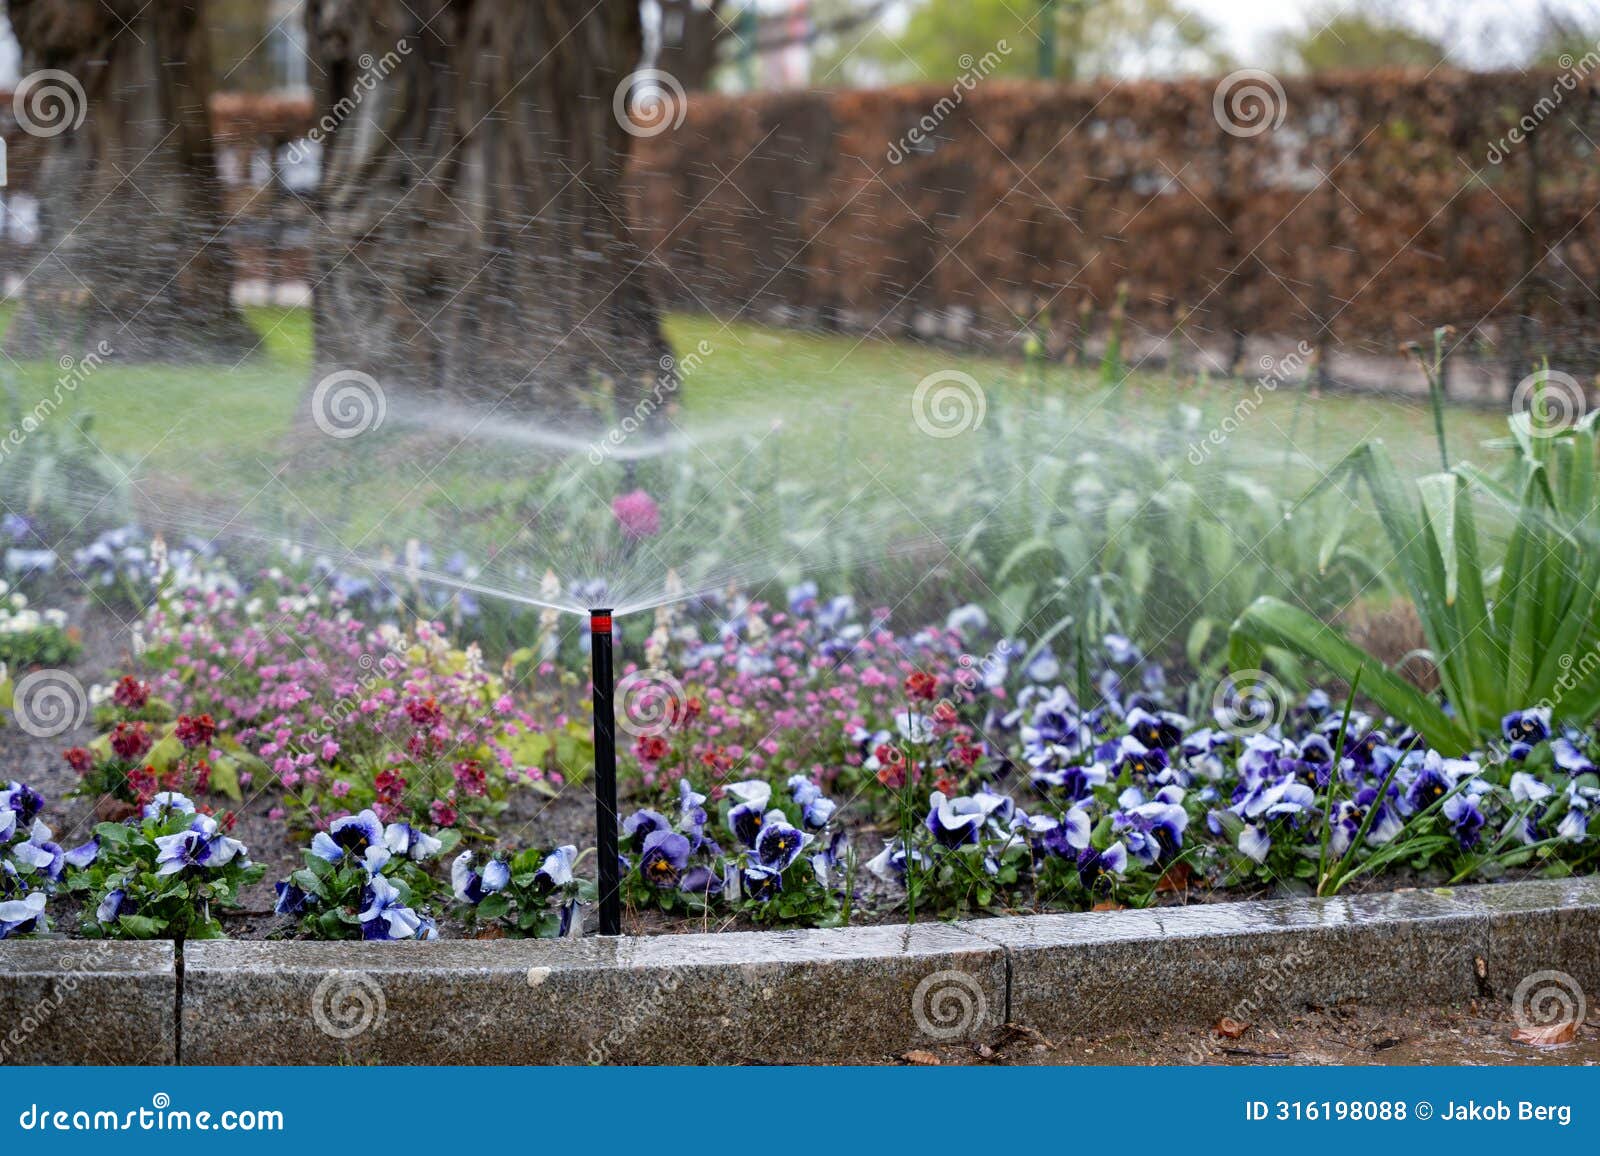 an electronic irrigation system waters the park's flowerbeds.